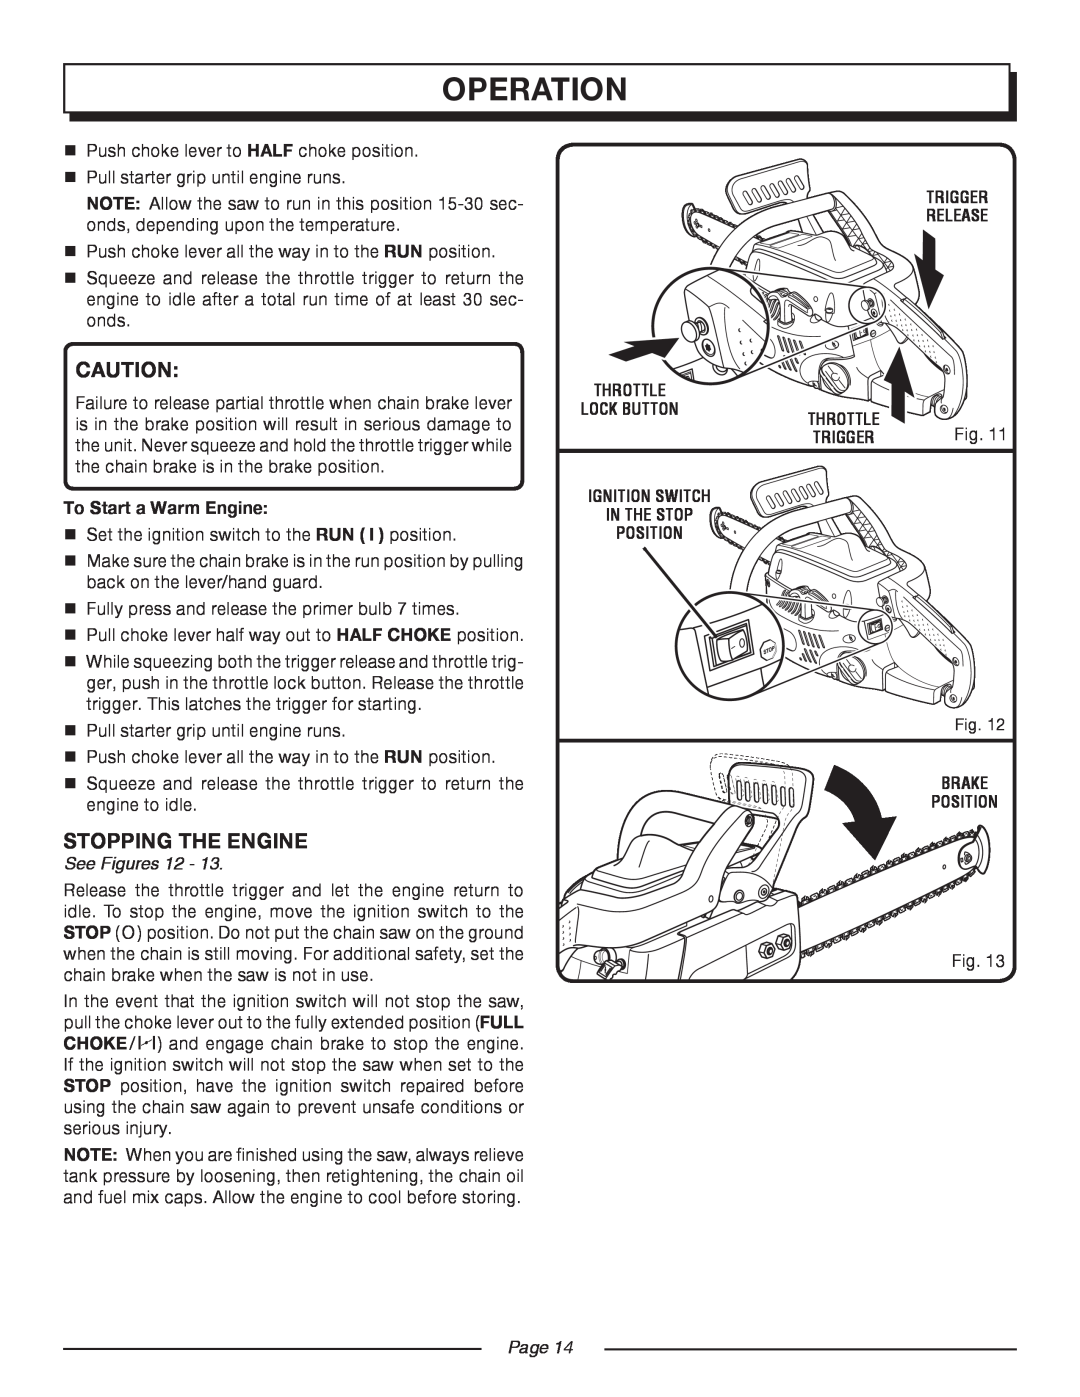 Homelite UT10516/16 IN. 33CC Stopping The Engine, operation, To Start a Warm Engine, See Figures, Trigger RELEASE, trigger 